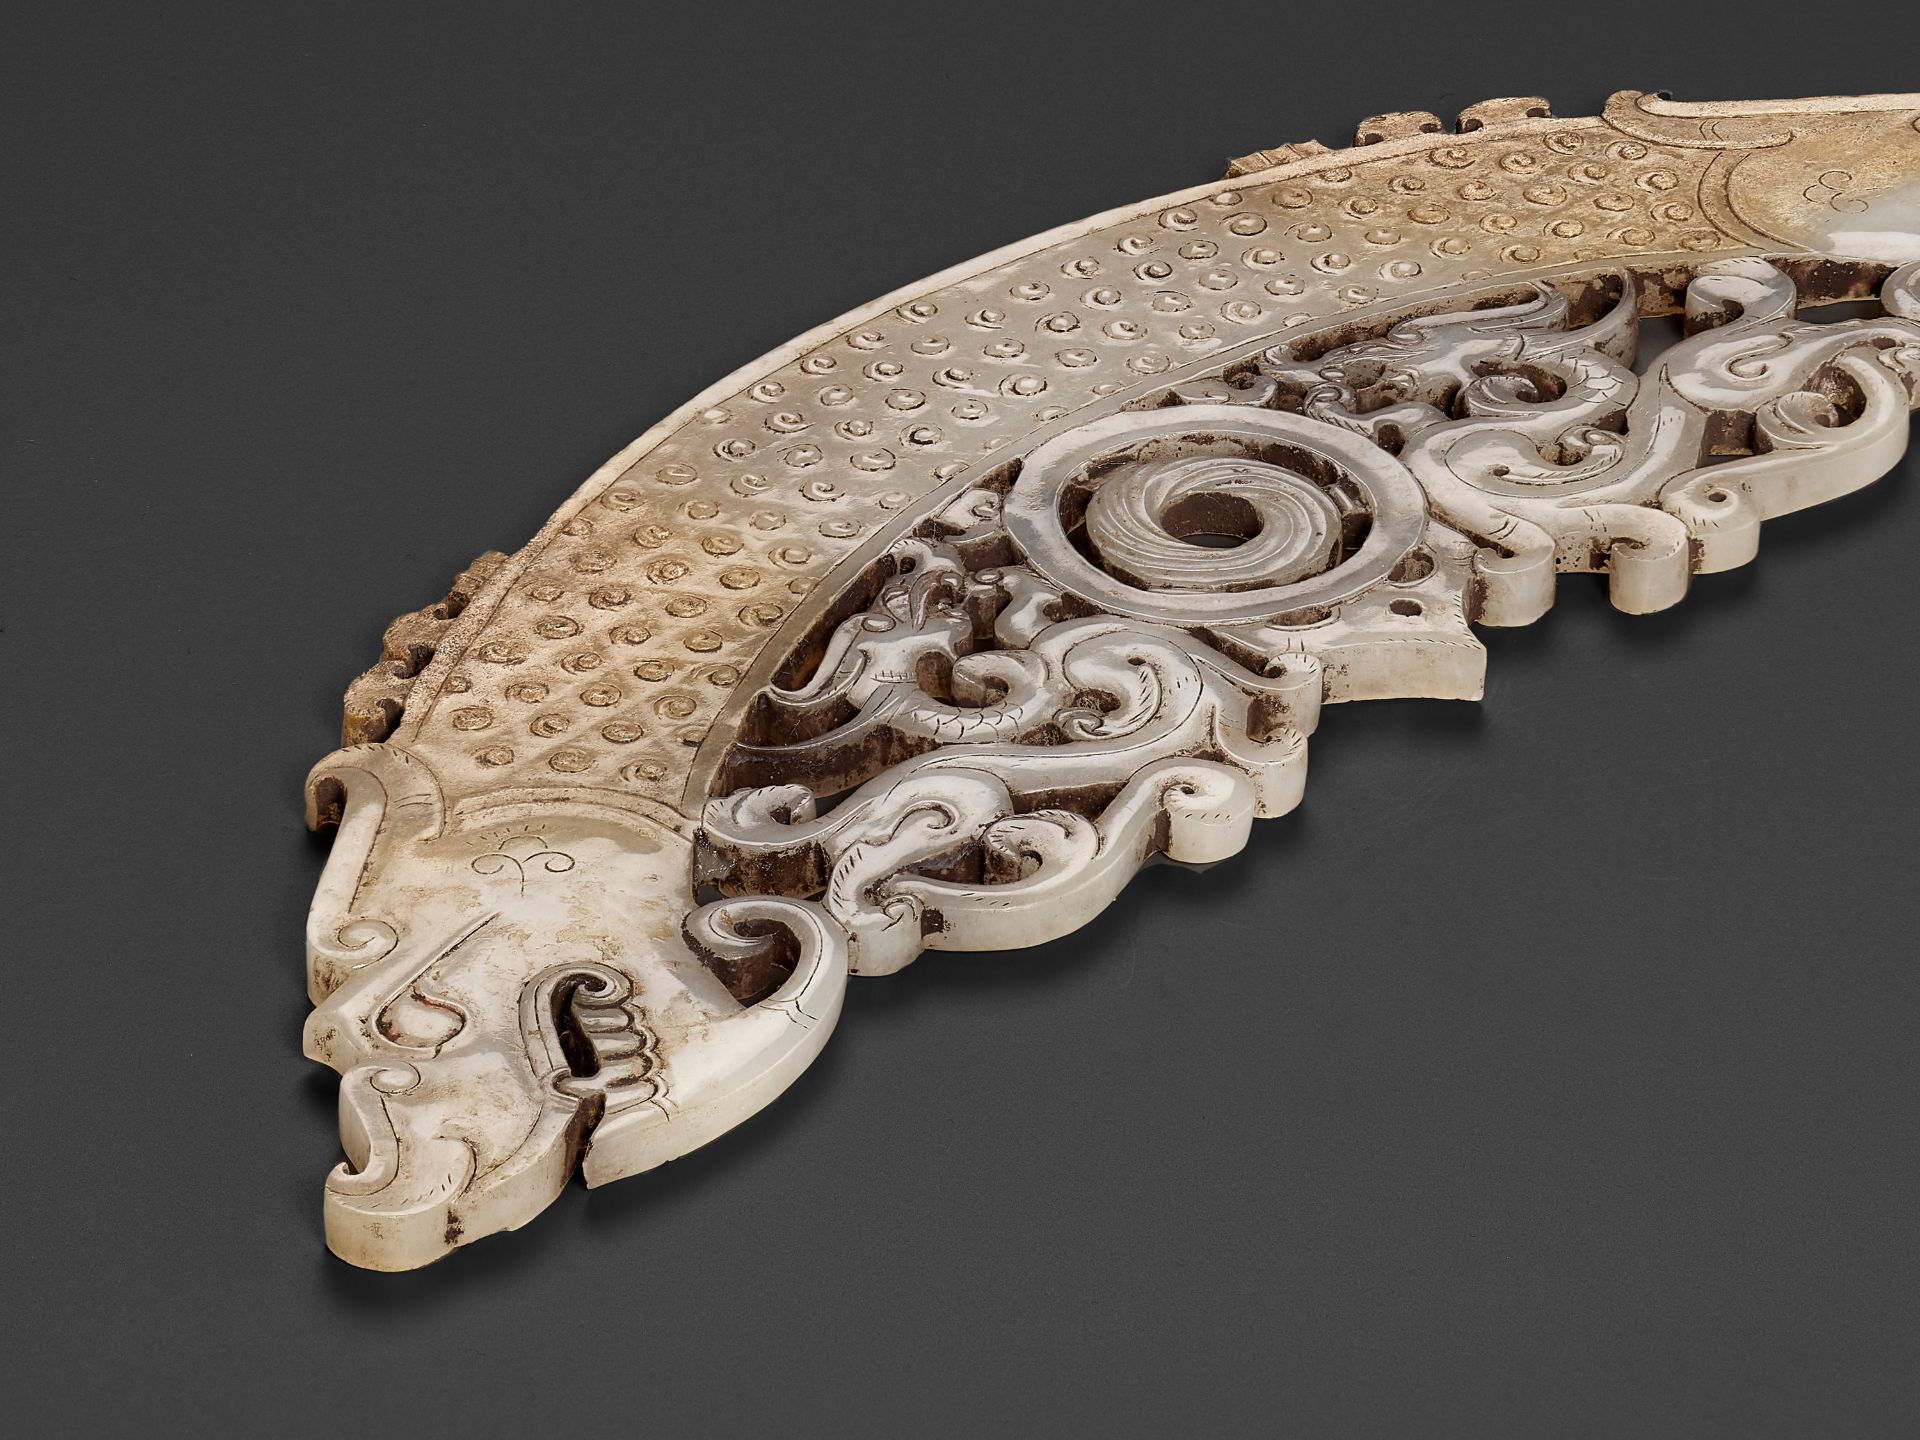 A WHITE AND RUSSET JADE 'DOUBLE DRAGON' PENDANT, HUANG, LATE EASTERN ZHOU TO HAN - Image 3 of 9